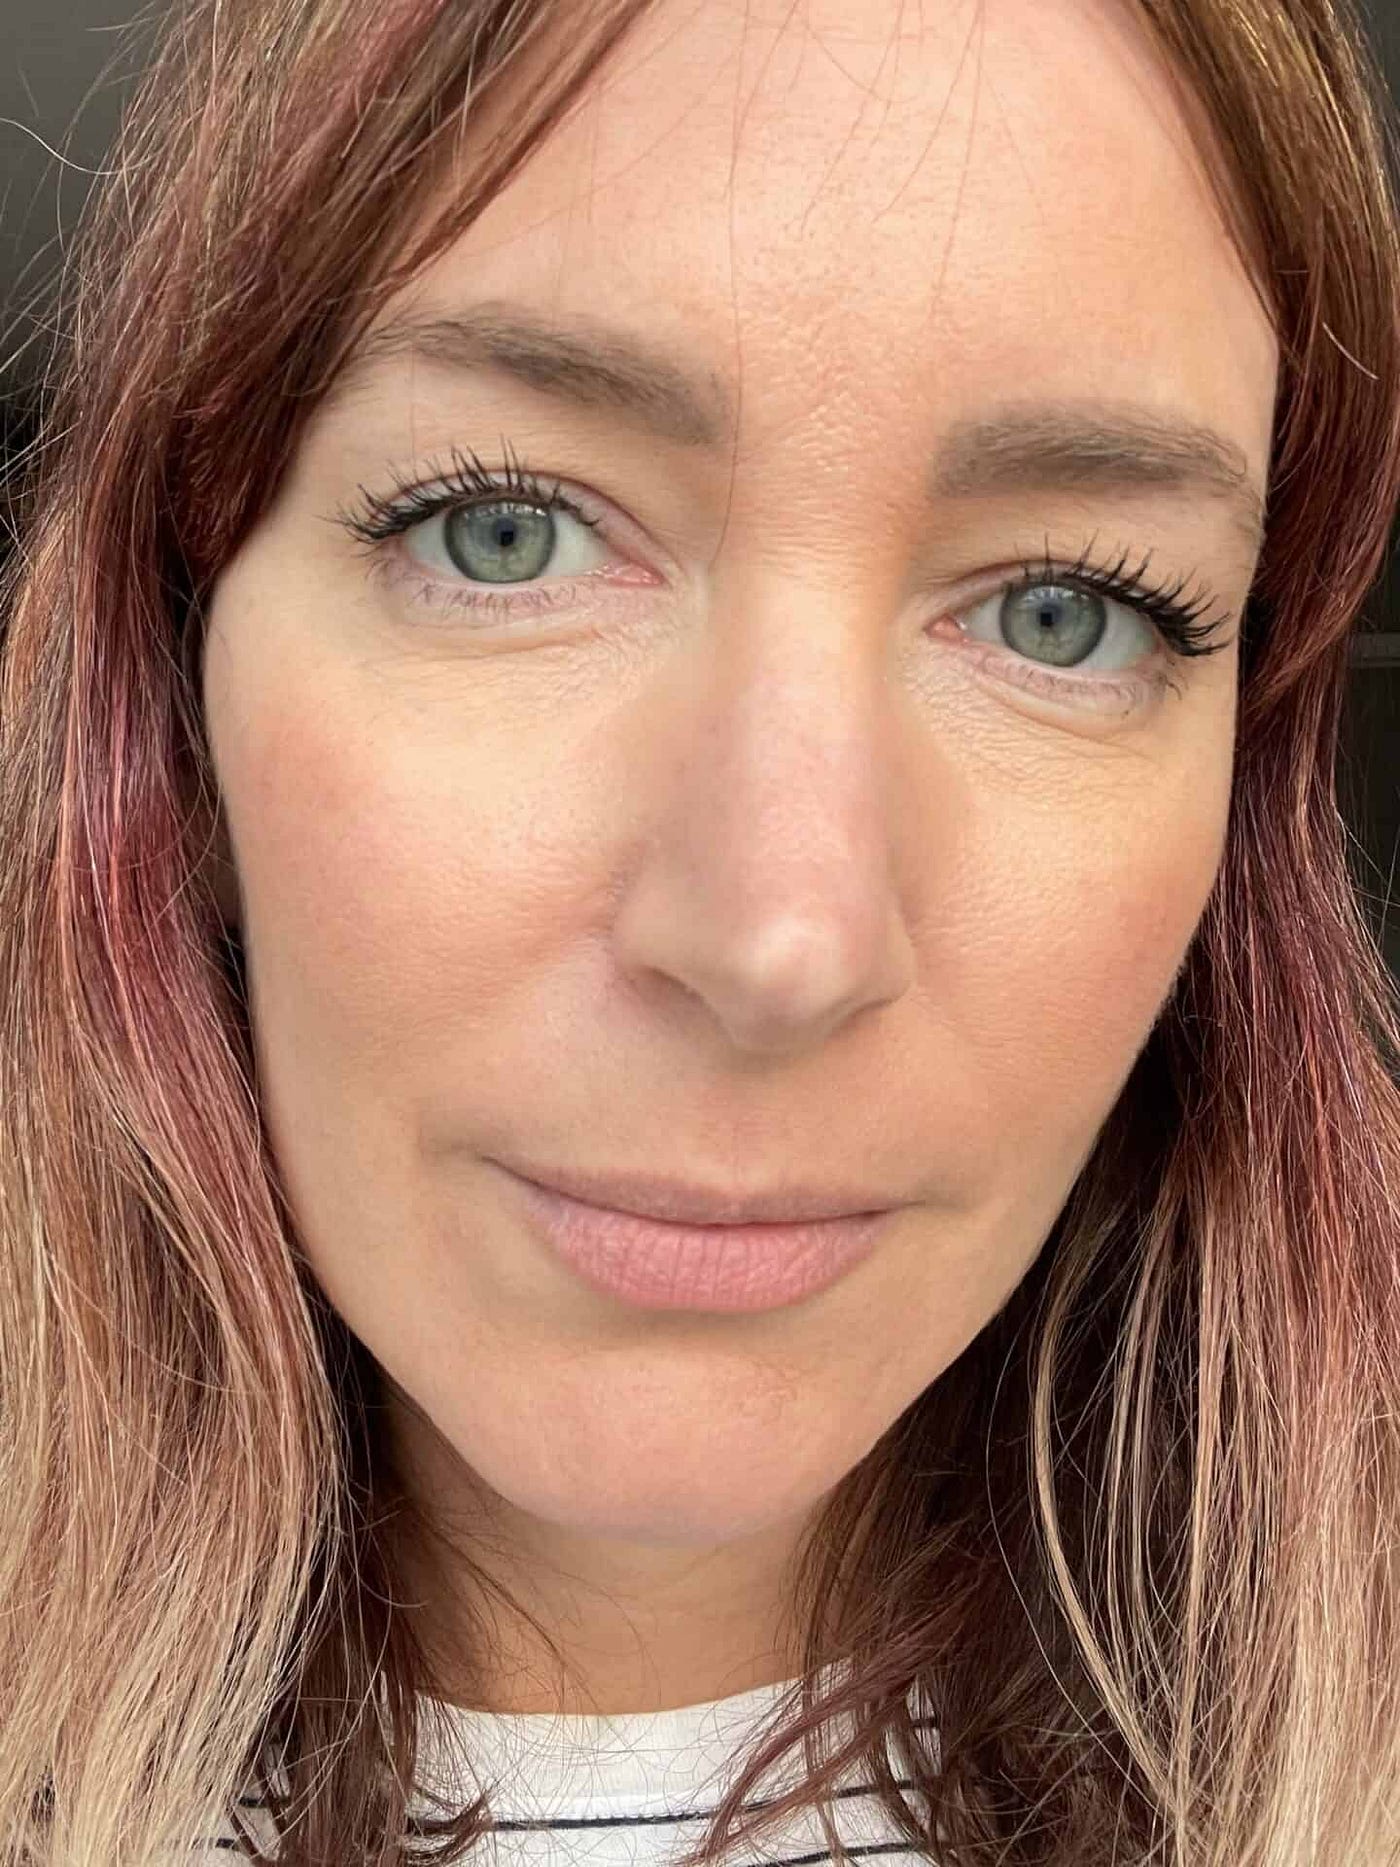 Becky Pink wearing Sukin tinted sunscreen, Madara CC Cream, Hynt Concealer, Love the Planet Powder and RMS Straight Up Mascara with more Sukin tinted Sheer Touch Sunscreen applied over the top